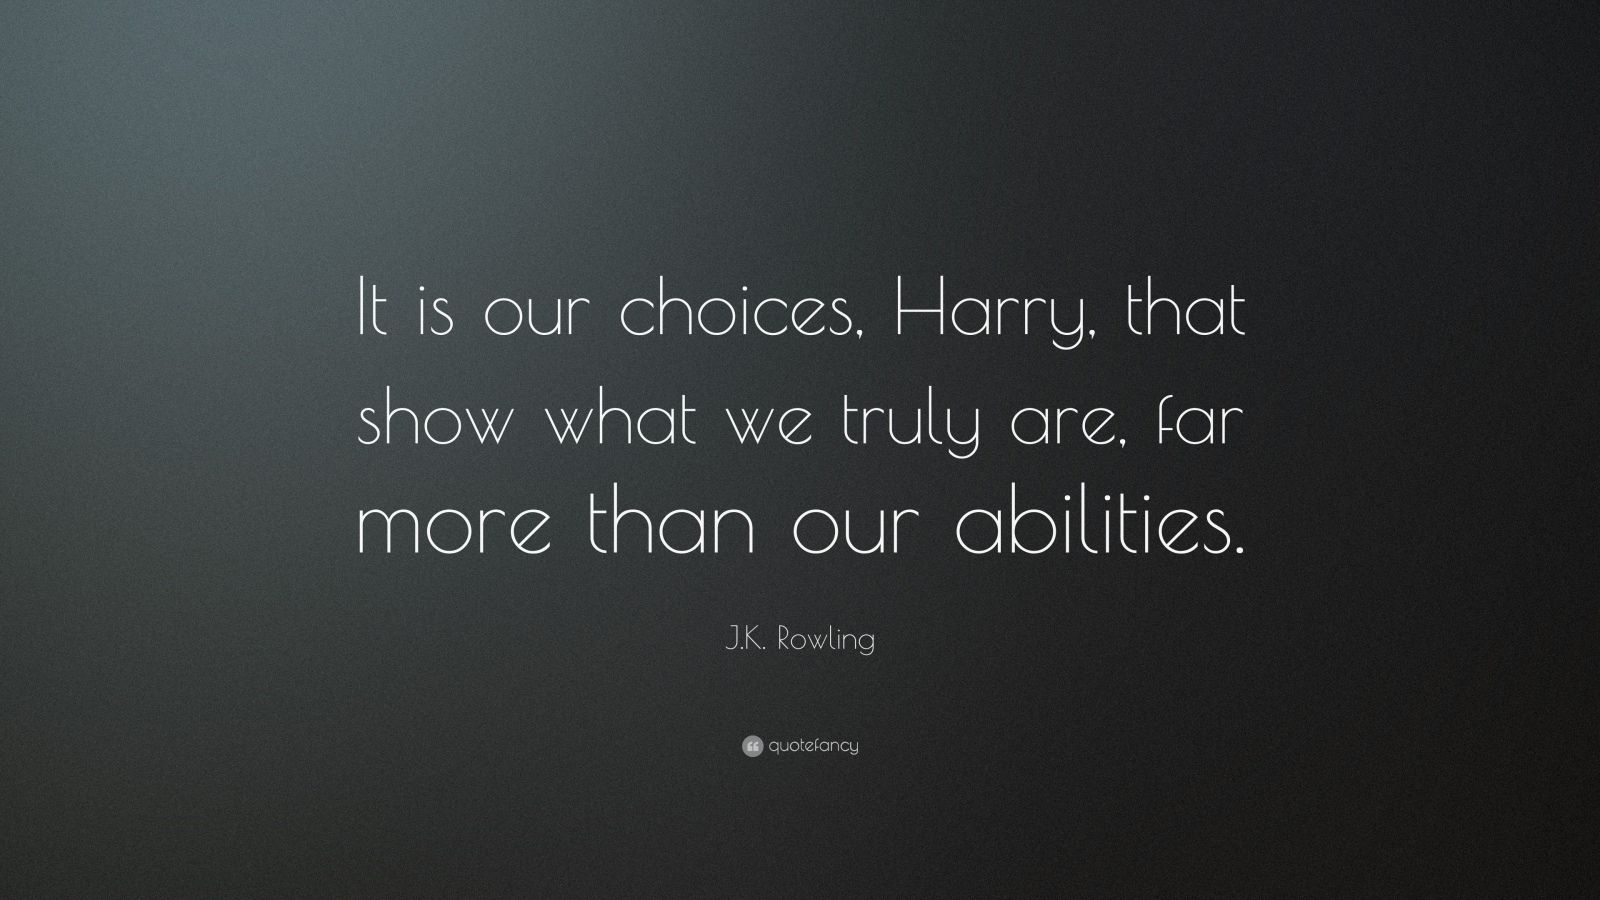 J.k. Rowling Quote: “It Is Our Choices, Harry, That Show What We Truly Are, Far More Than Our Abilities.”